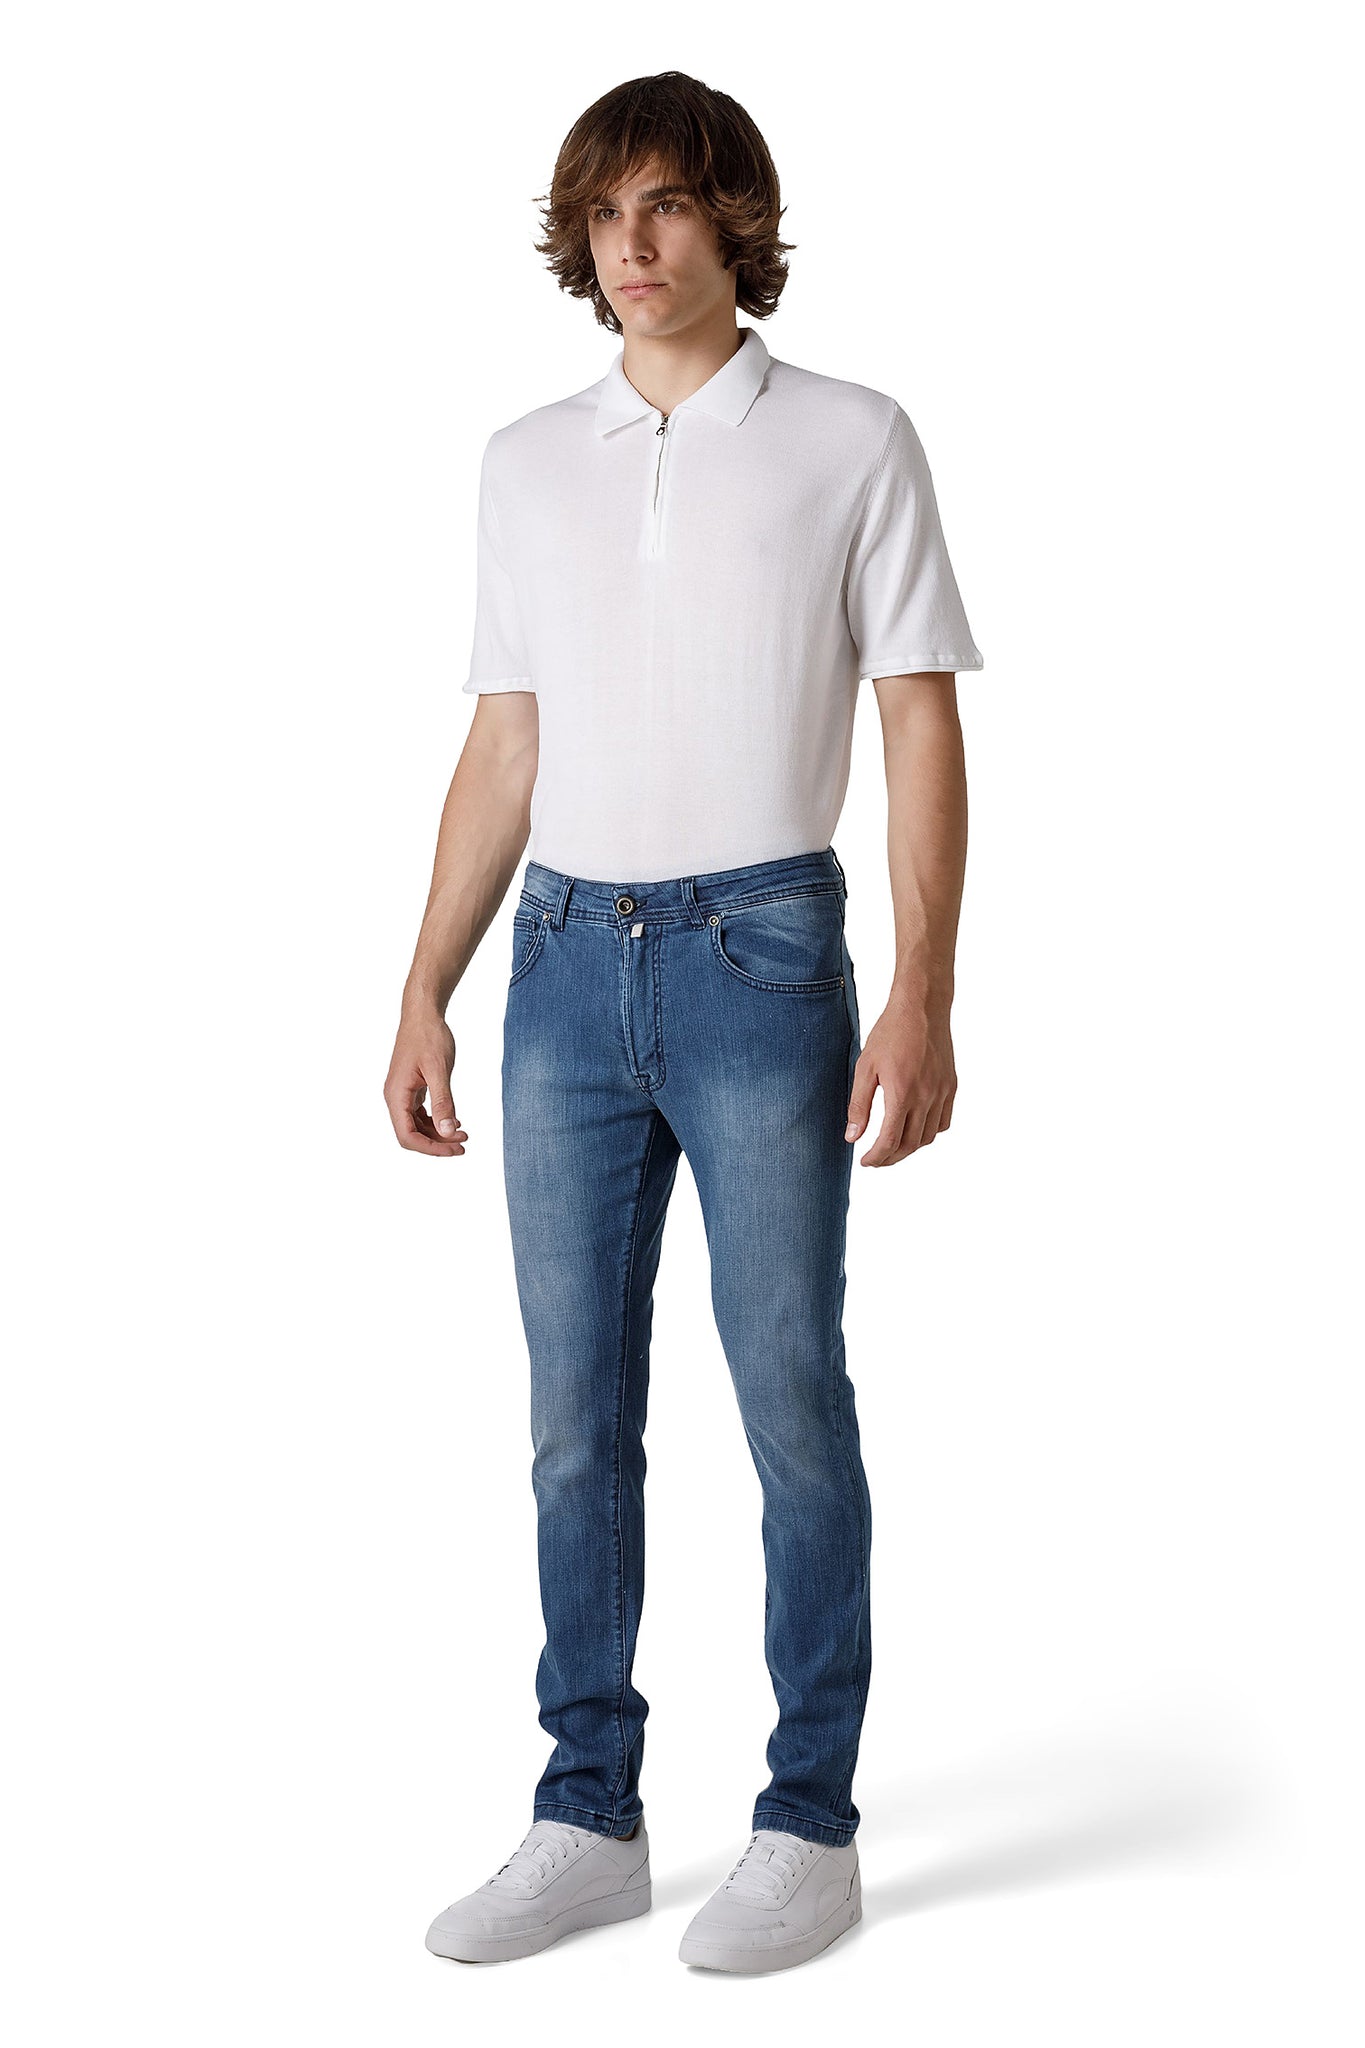 Jeans Slim Fit Hyrcus / Jeans - Ideal Moda